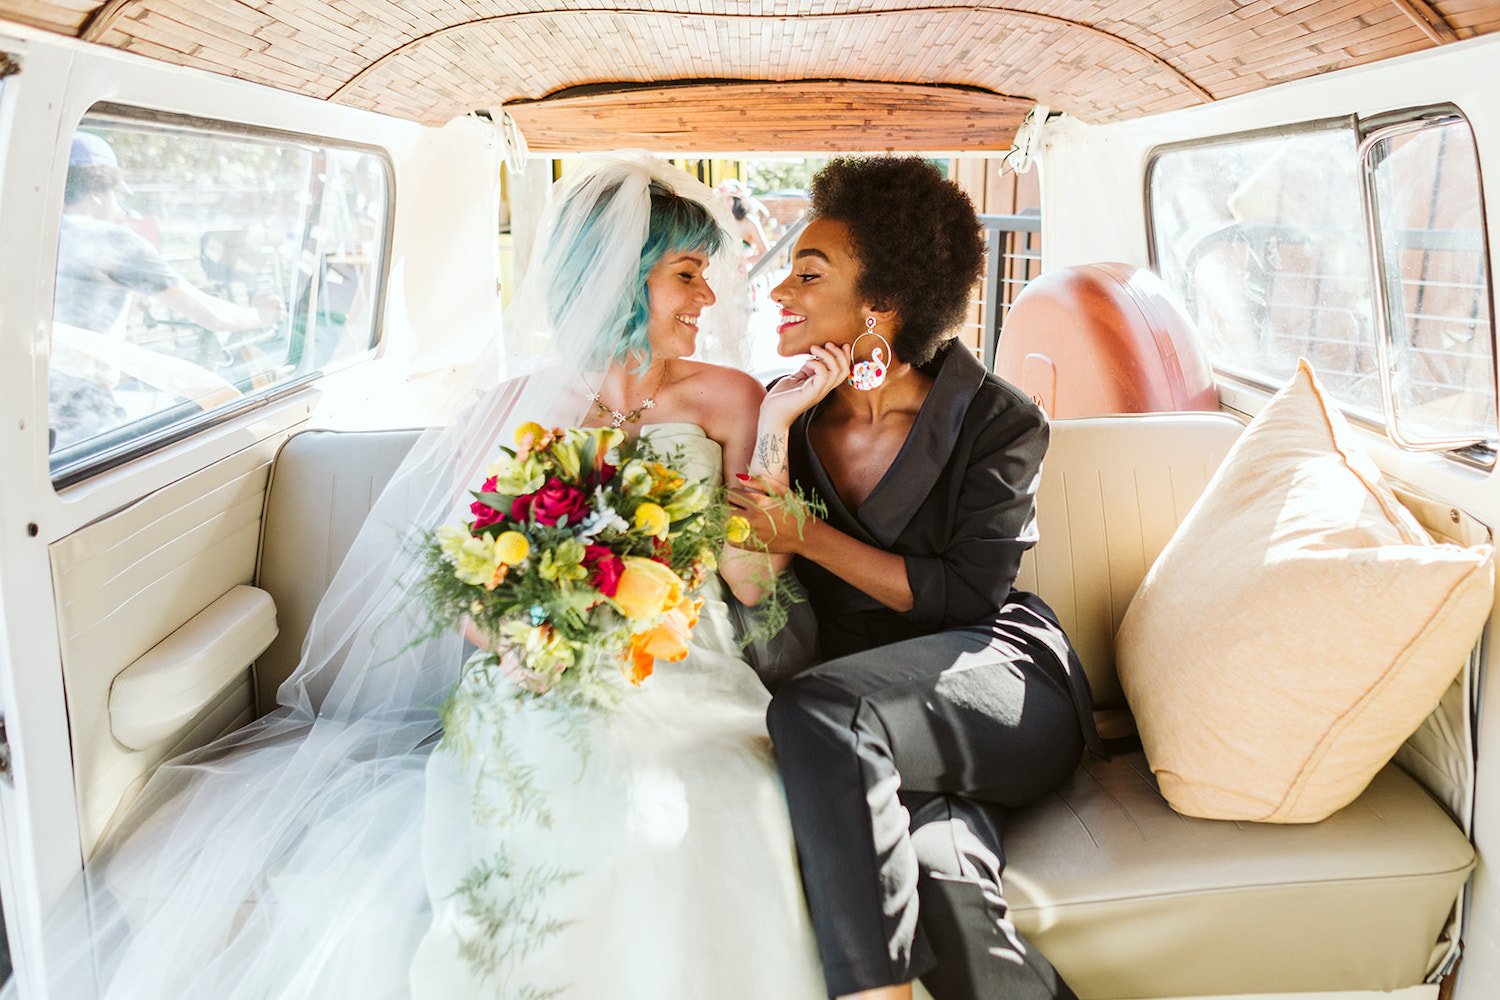 bride with blue hair caresses her partner's chin in backseat of vintage VW bus at LGBTQ wedding in Chattanooga styled shoot